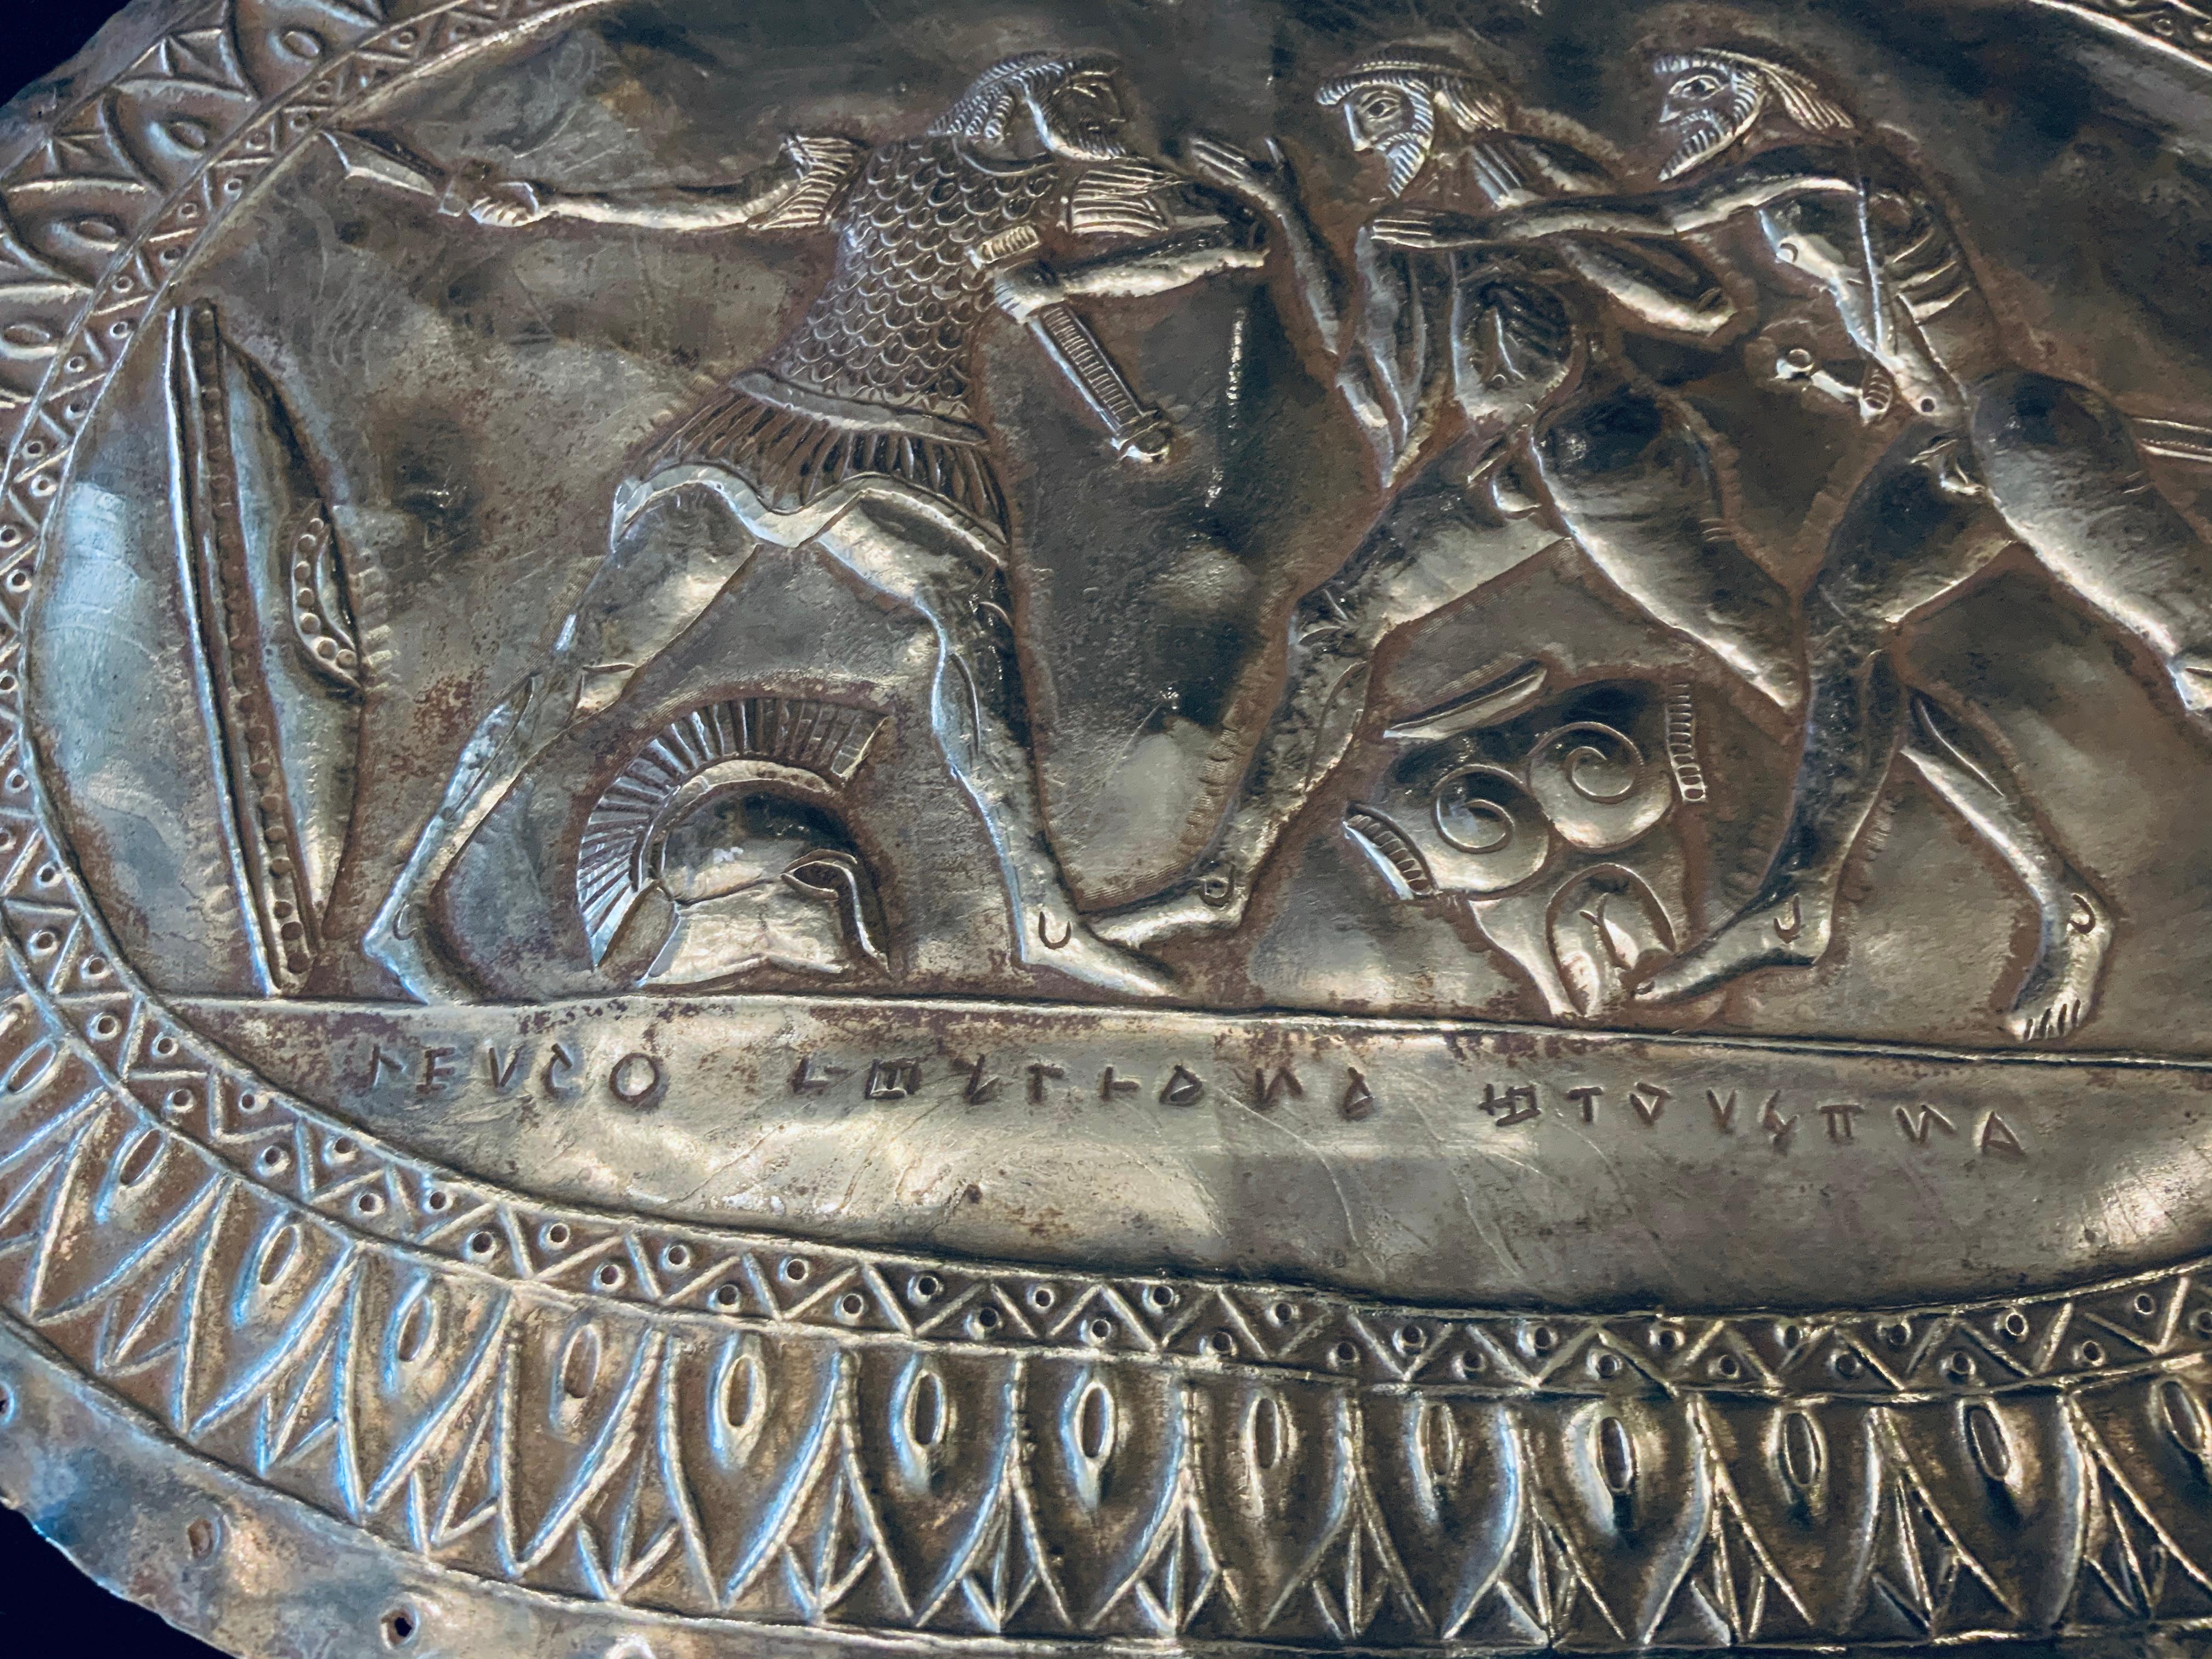 This is a large Greek style repousse oval metal plaque depicting a scene of a Spartan warrior trying to defend himself against two nudes warriors from another tribe. There are two shields standing at each side of them. There are also a Spartan